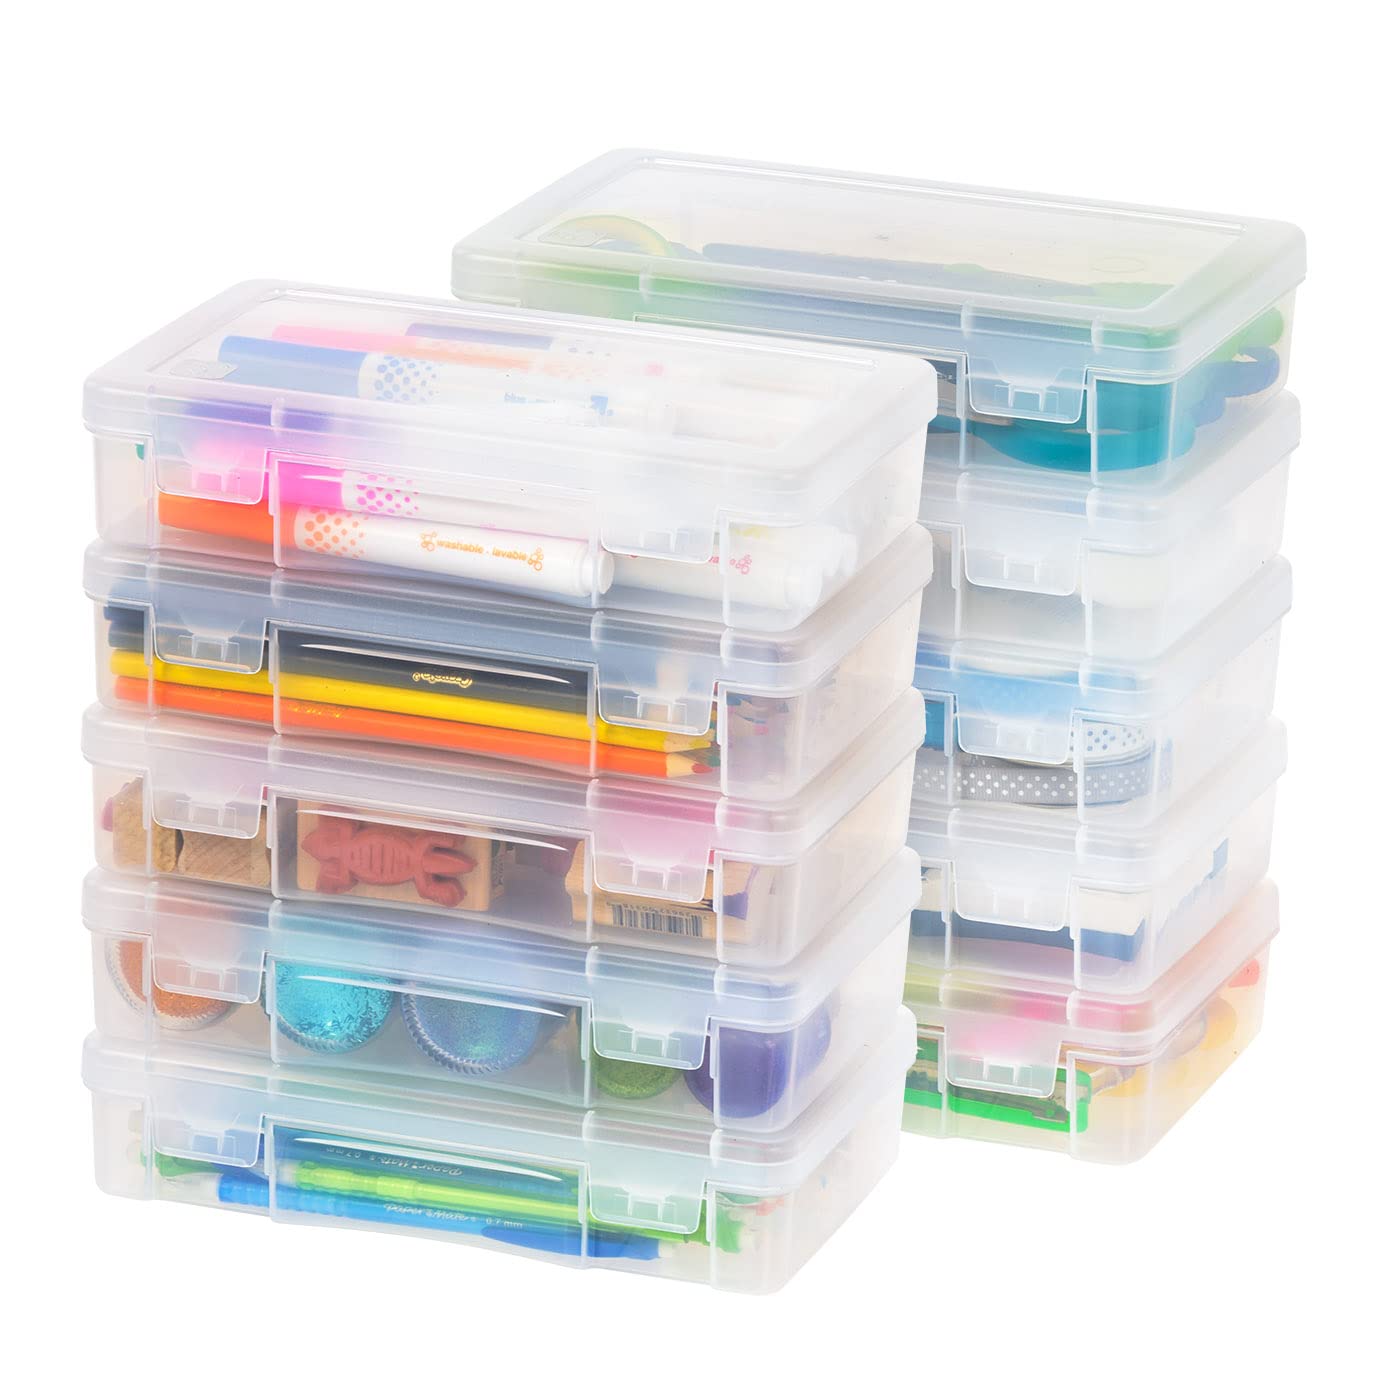 IRIS USA 10 Pack Medium Plastic Hobby Art Craft Supply Organizer Storage Containers with Latching Lid, for Pencil, Lego, Crayon, Ribbons, Wahi Tape, Beads, Sticker, Yarn, Ornaments, Stackable, Clear